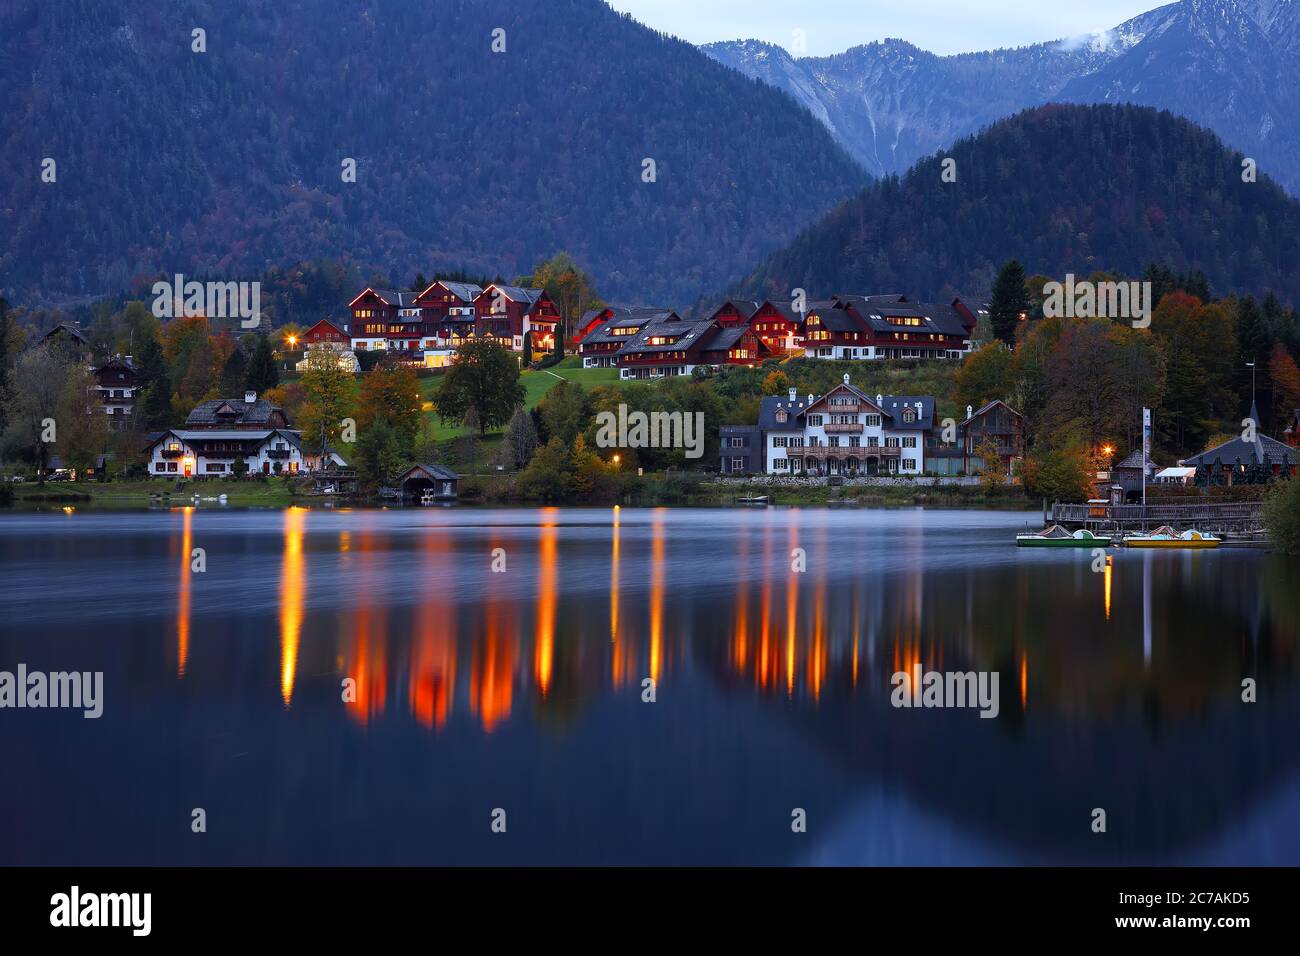 Dramatic and picturesque scene at evening lake Grundelsee. Mirror reflection. . Location: resort Grundlsee, Liezen District of Styria, Austria, Alps. Stock Photo